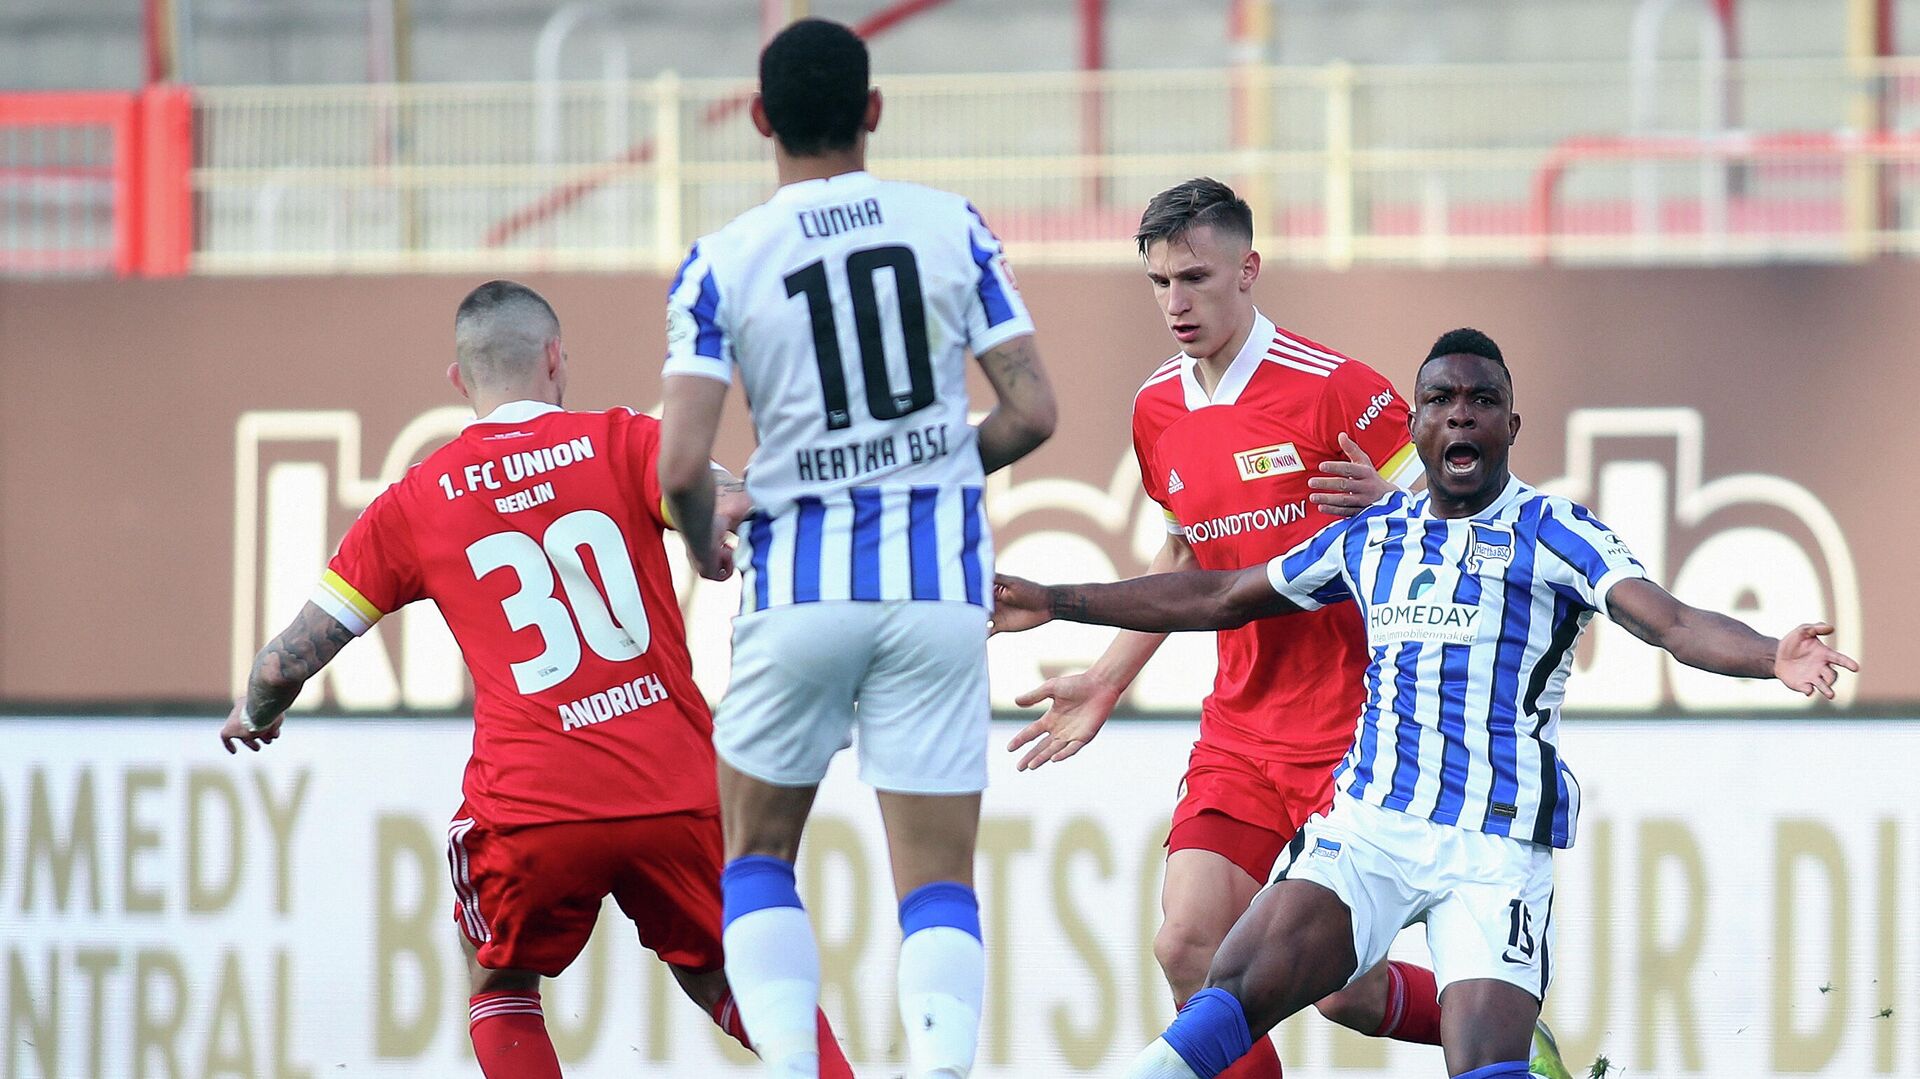 Hertha Berlin's Colombian forward Jhon Cordoba (R) calls for a foul during the German first divison Bundesliga football match between 1 FC Union Berlin and Hertha BSC Berlin in Berlin on April 4, 2021. (Photo by Andreas GORA / POOL / AFP) / DFL REGULATIONS PROHIBIT ANY USE OF PHOTOGRAPHS AS IMAGE SEQUENCES AND/OR QUASI-VIDEO - РИА Новости, 1920, 04.04.2021